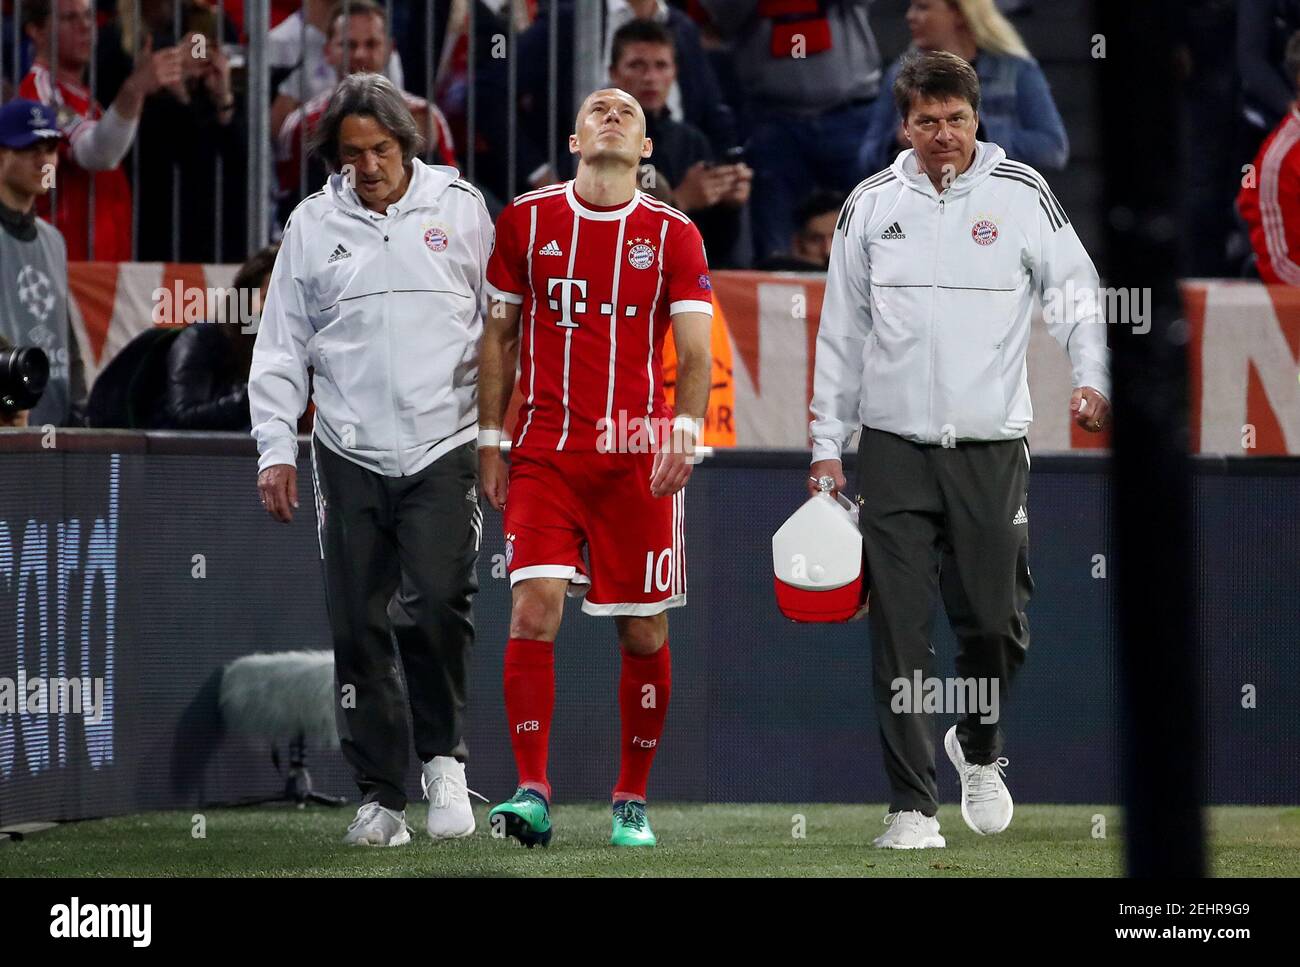 Soccer Football - Champions League Semi Final First Leg - Bayern Munich vs Real Madrid - Allianz Arena, Munich, Germany - April 25, 2018   Bayern Munich's Arjen Robben looks dejected as he leaves the pitch with medical staff after sustaining an injury    REUTERS/Michael Dalder Stock Photo